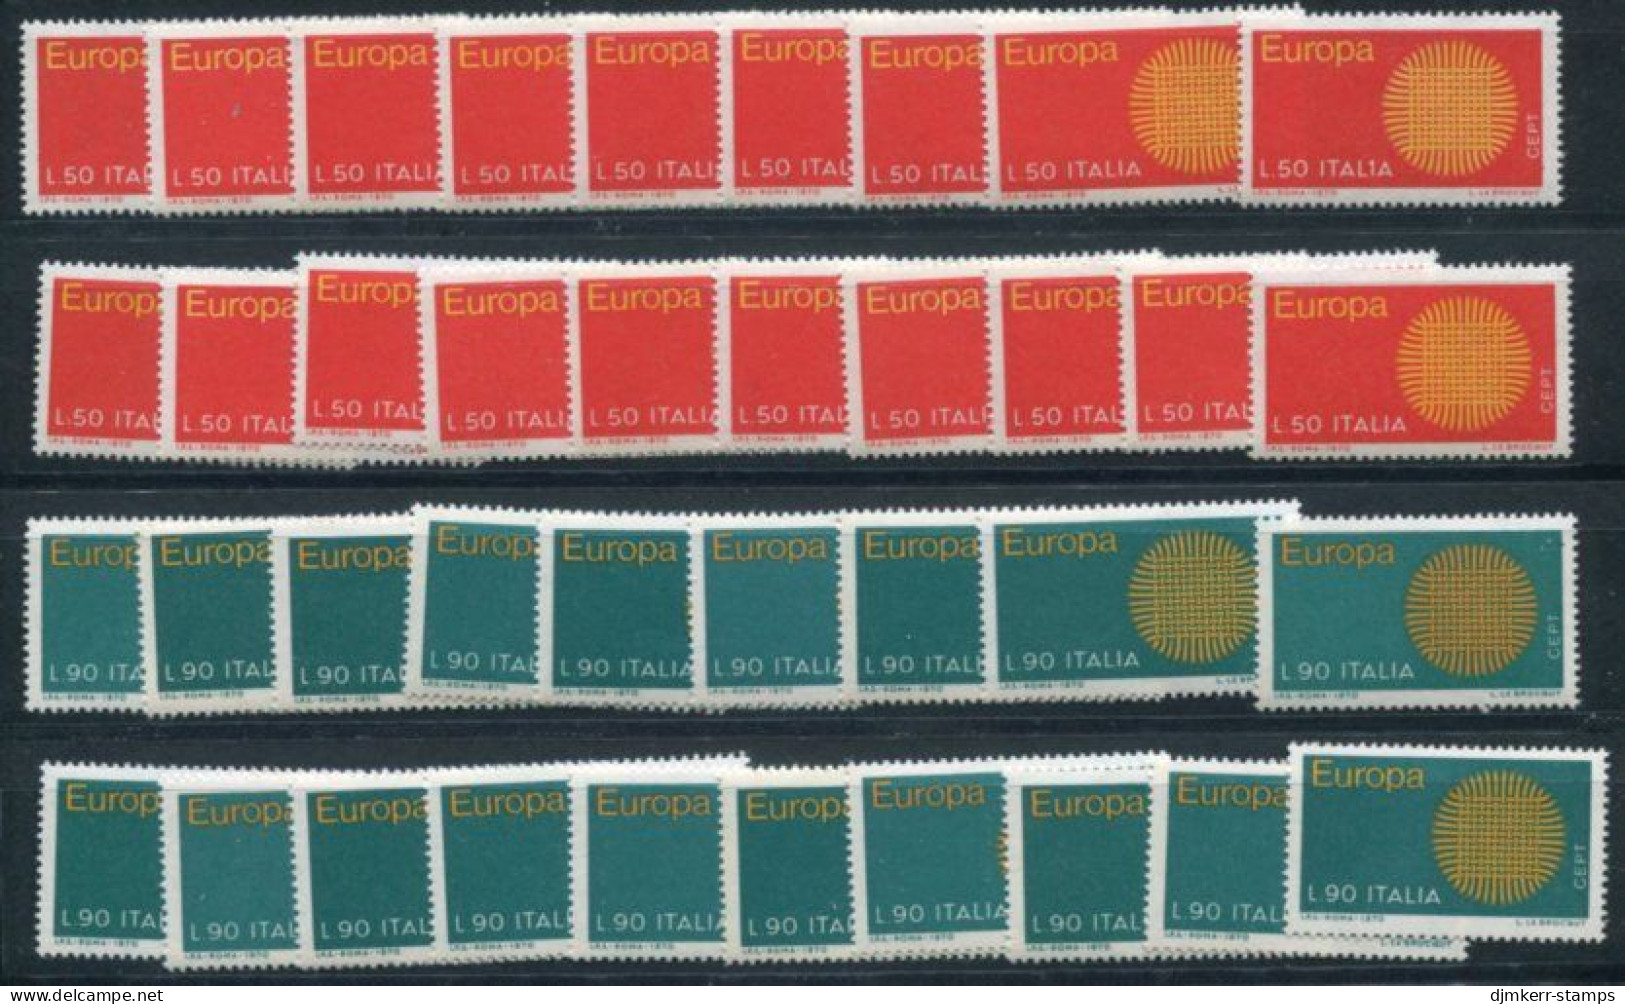 ITALY 1970 Europa, 19 Sets  MNH / **.  Michel 1309-10 - 1961-70: Mint/hinged